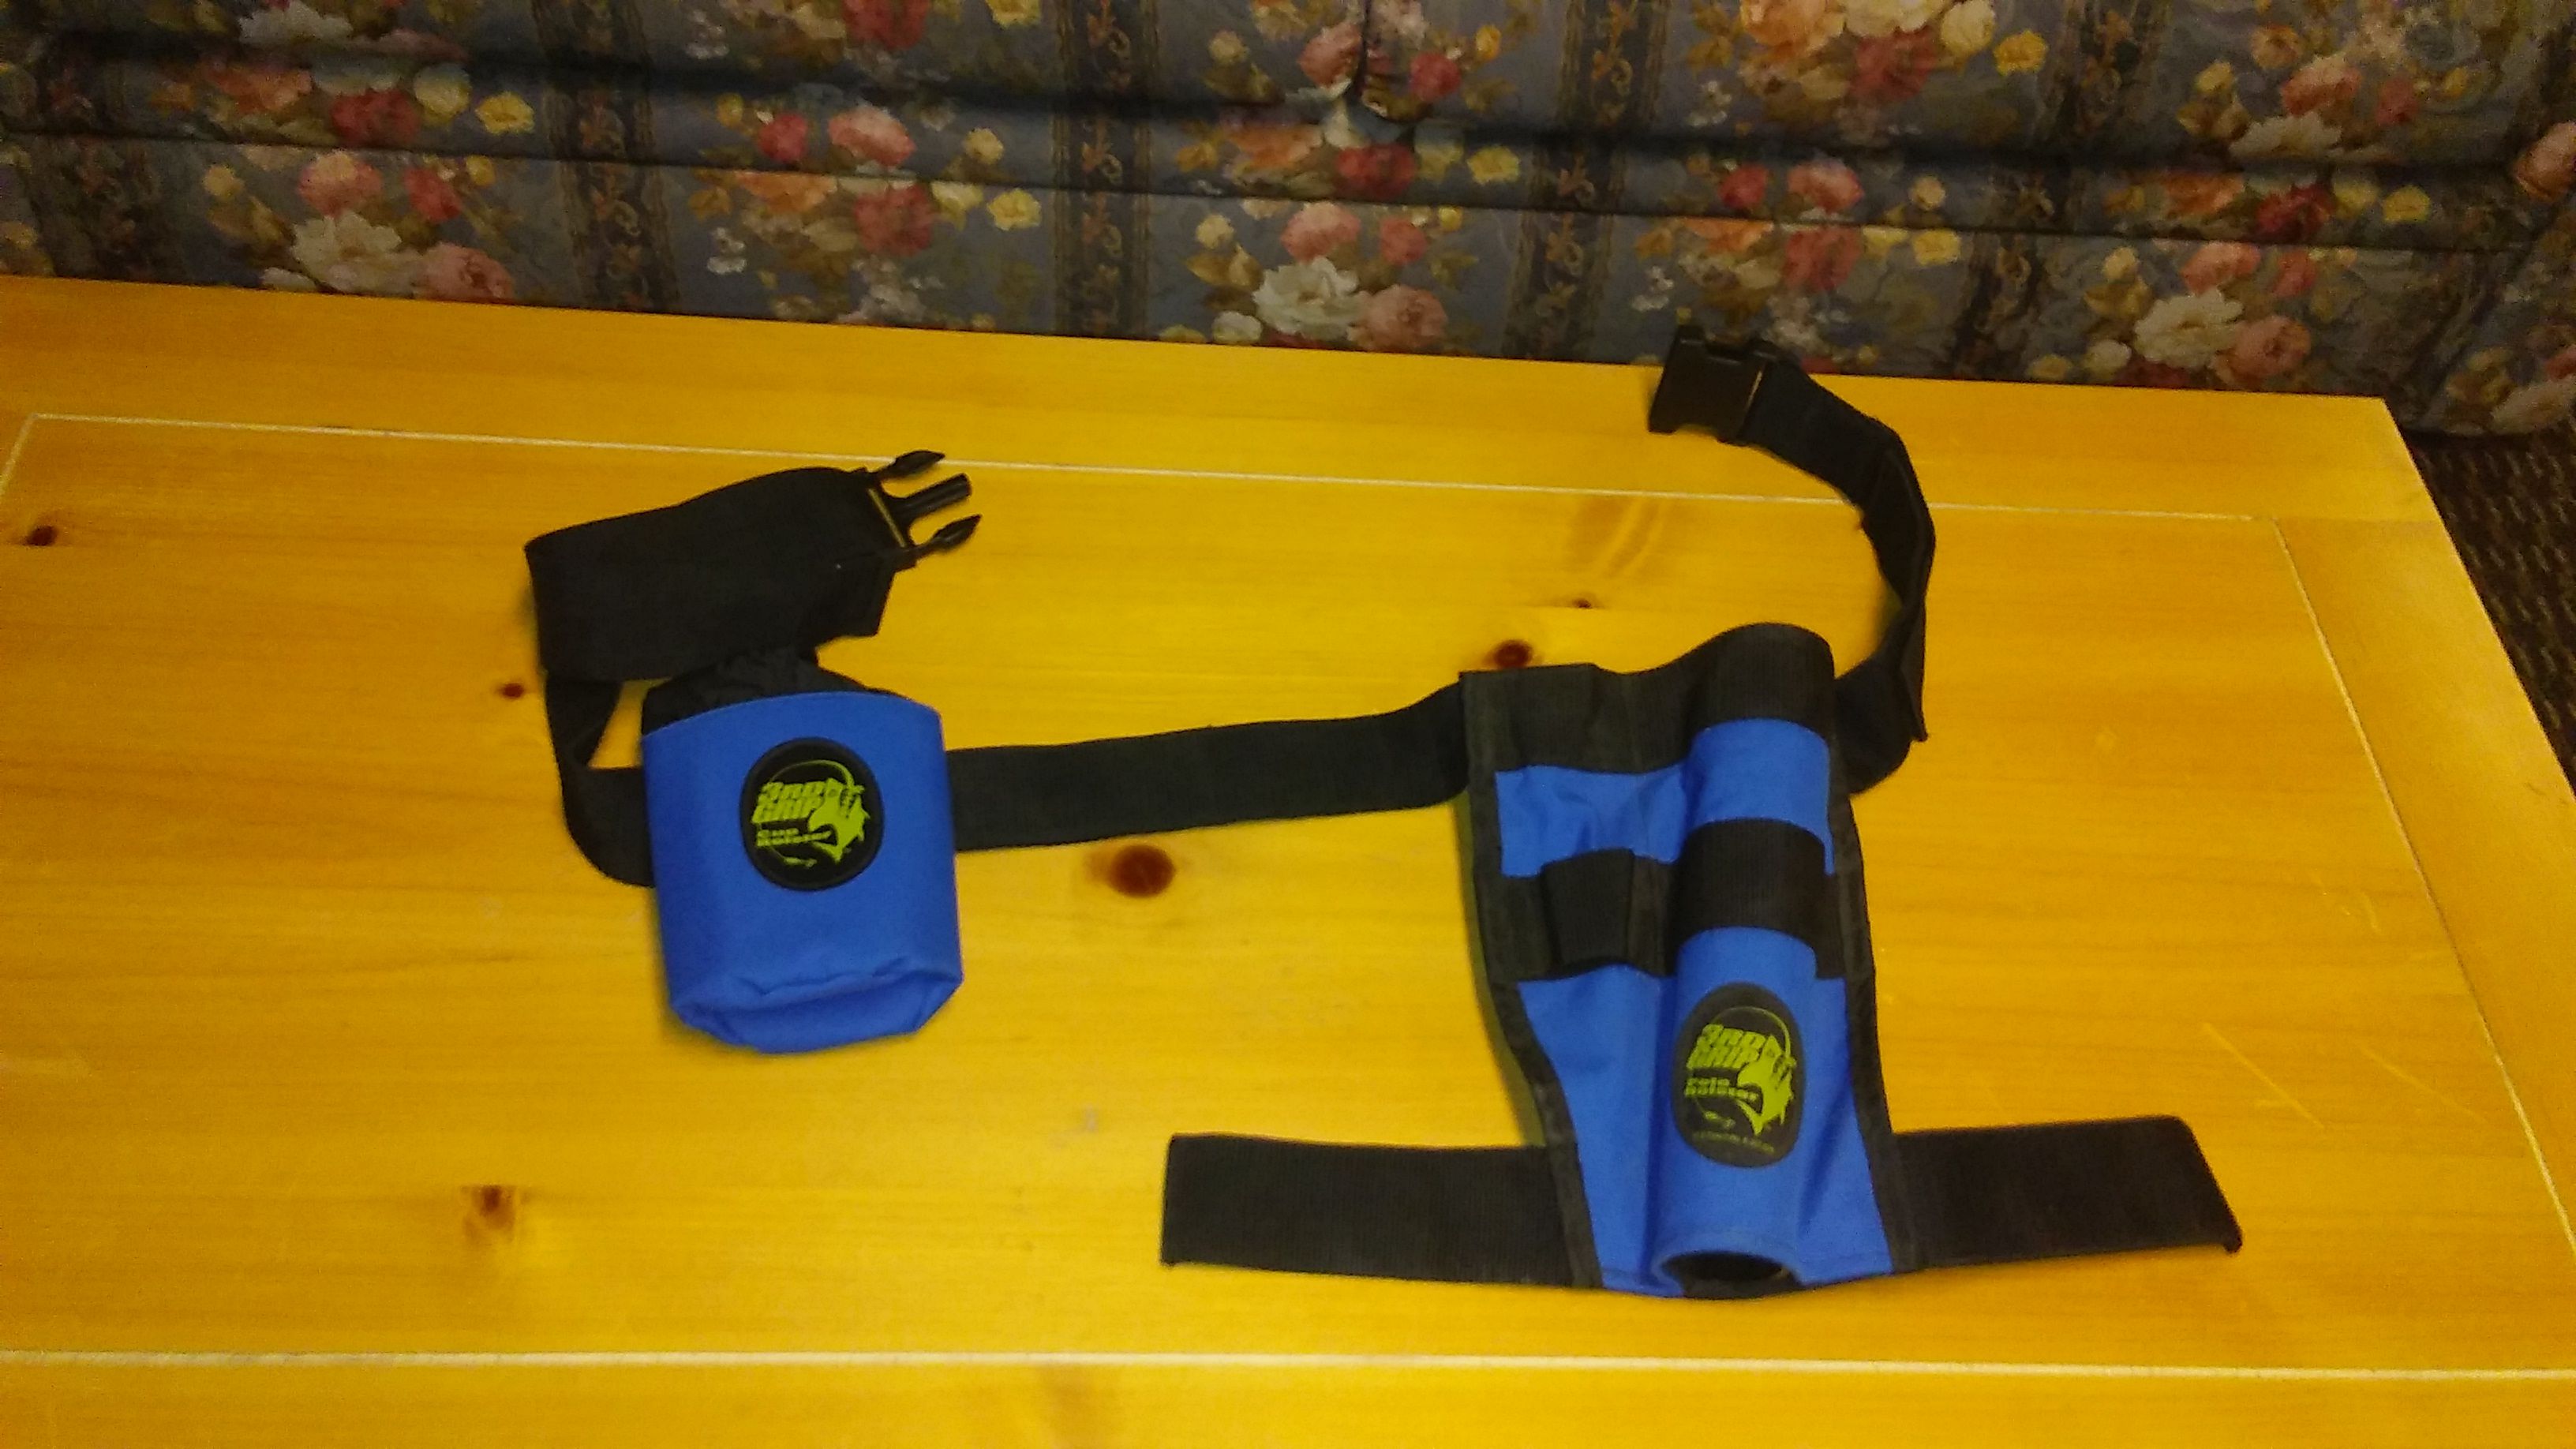 3rd grip fishing pole holster & cup holster